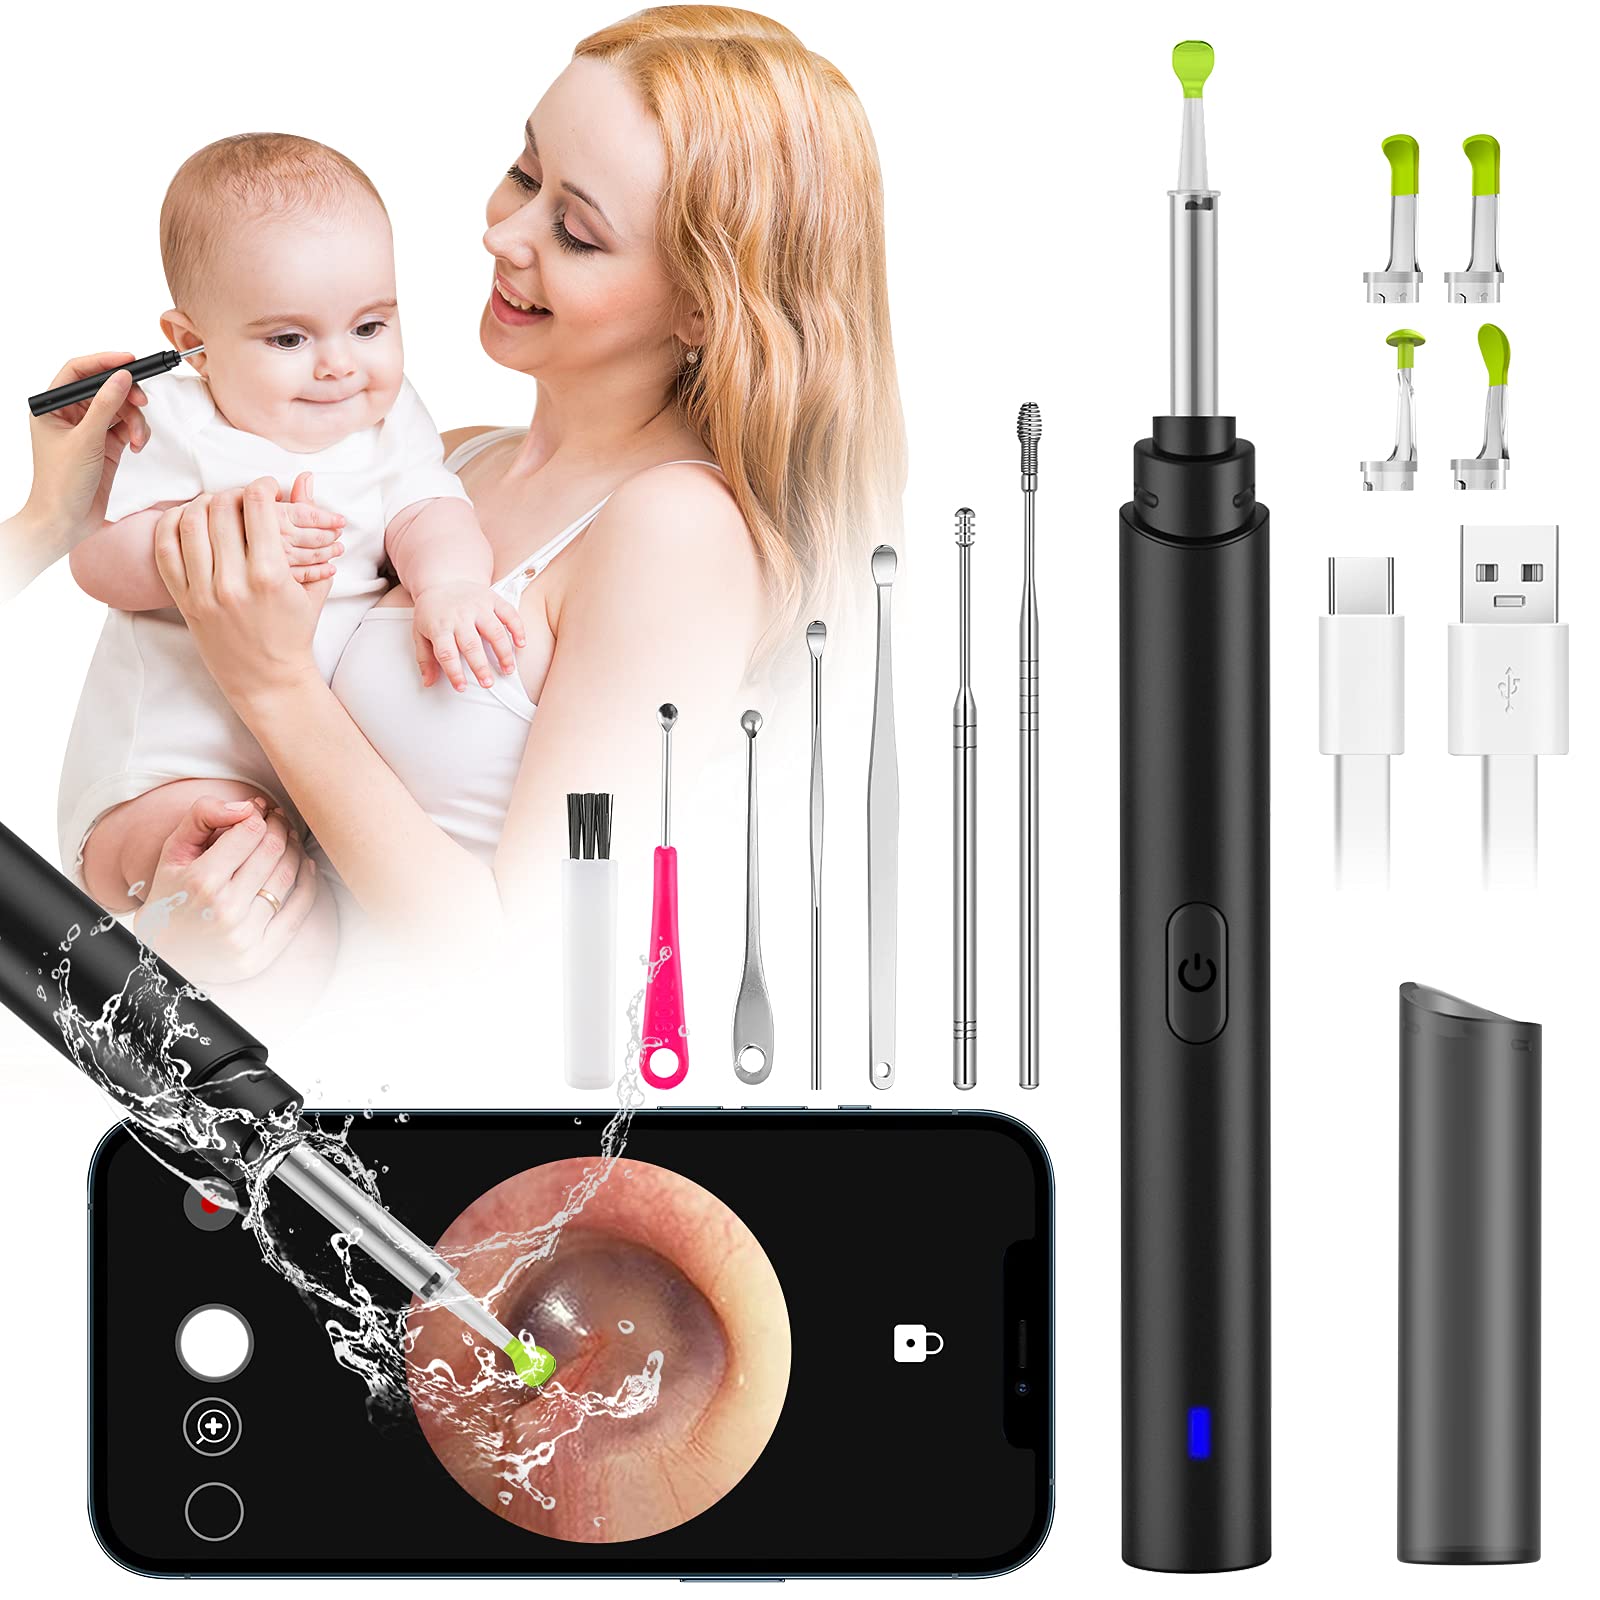 Ear Wax Removal Tool Camera, Smart Visual Ear Cleaner, 1296P FHD Wireless  Ear Otoscope with 6